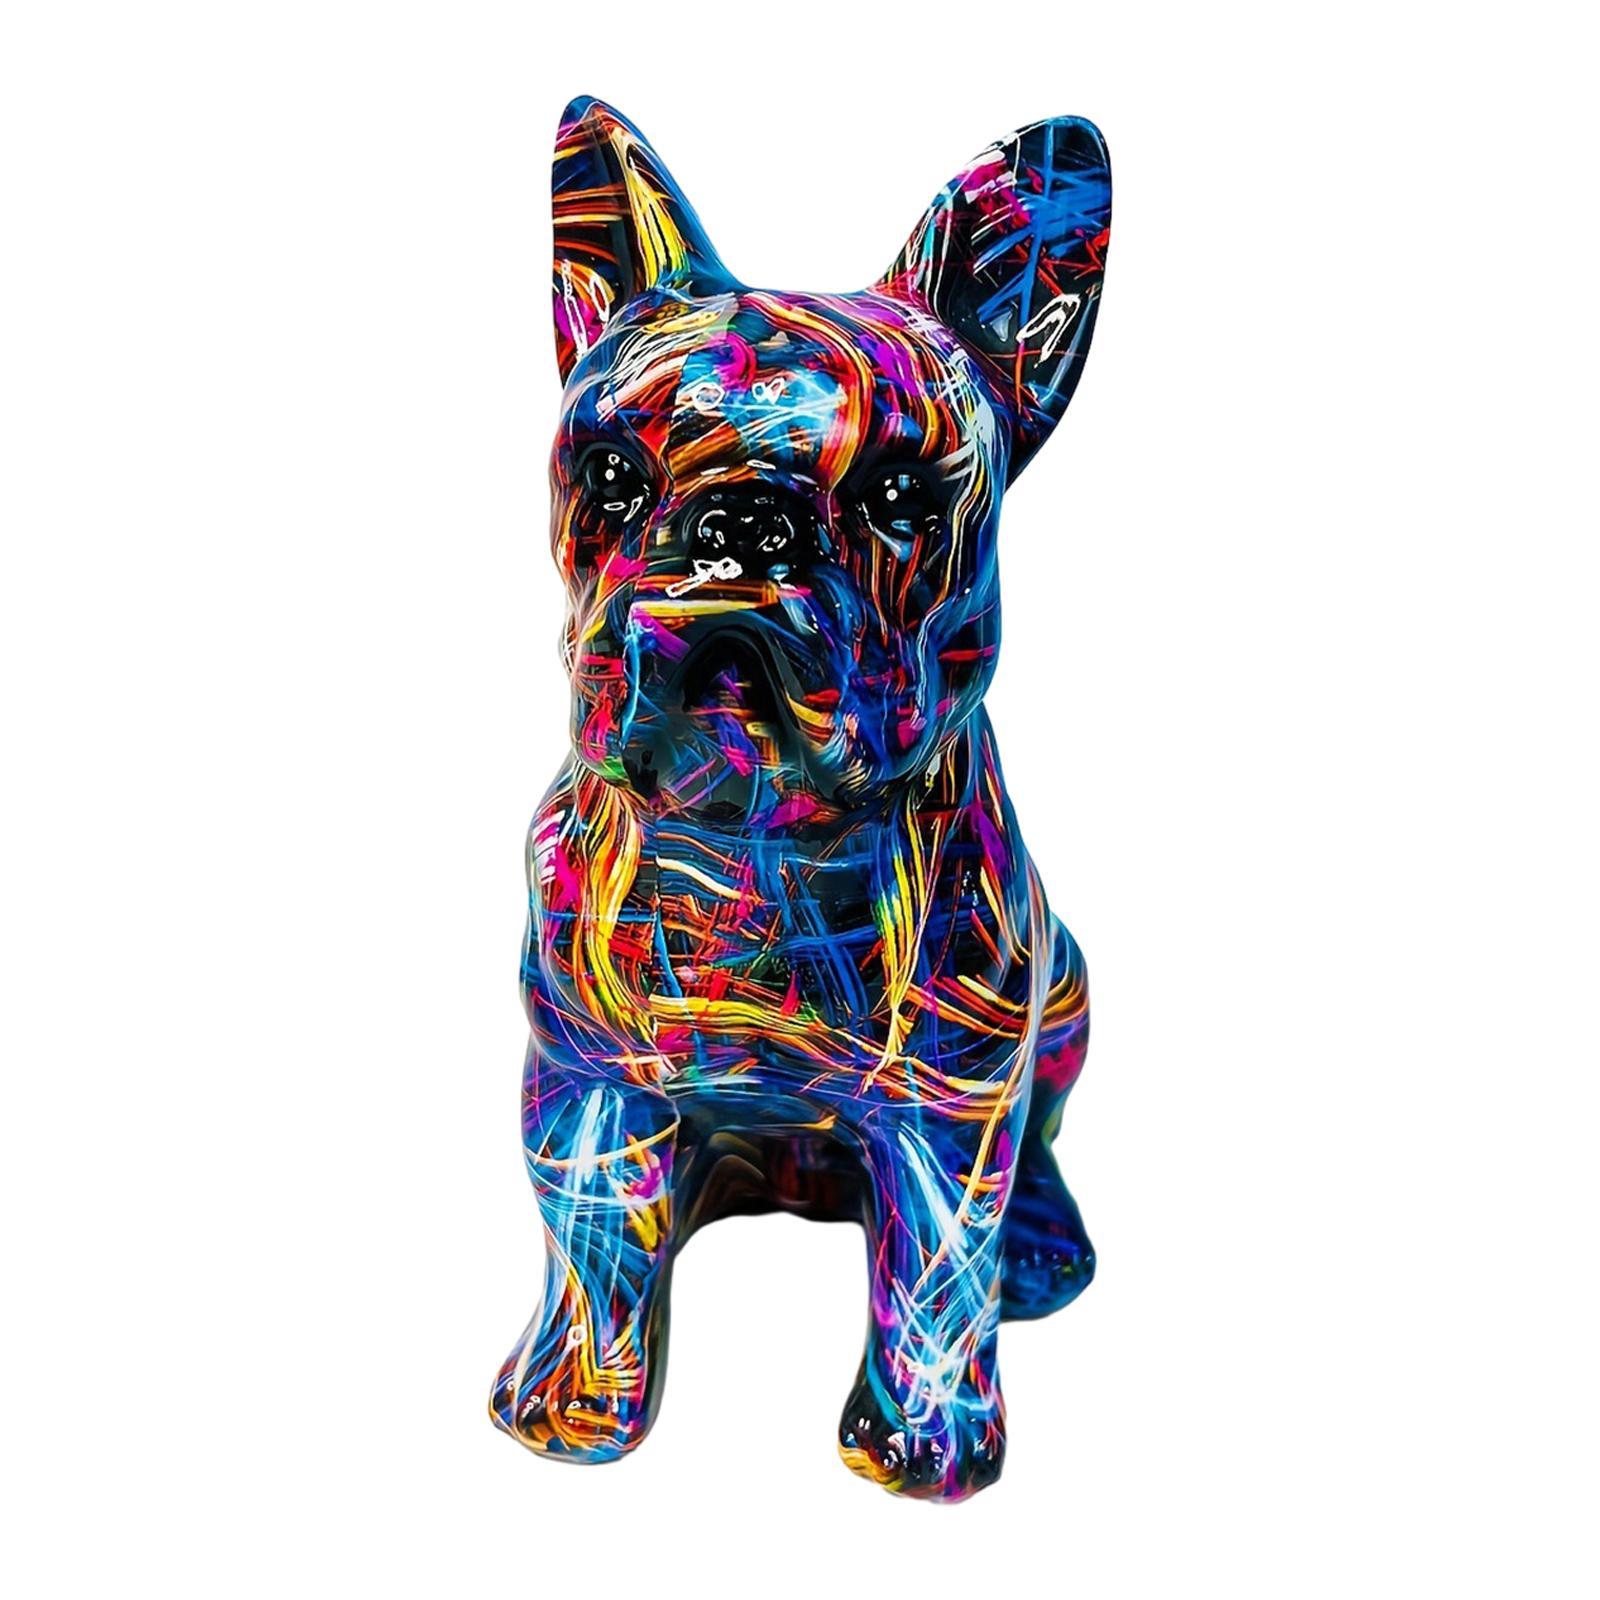 Dog Statue Dog Ornament Resin  Creative Animal Statue Dog Sculpture for Bedroom  Cabinets Entryway